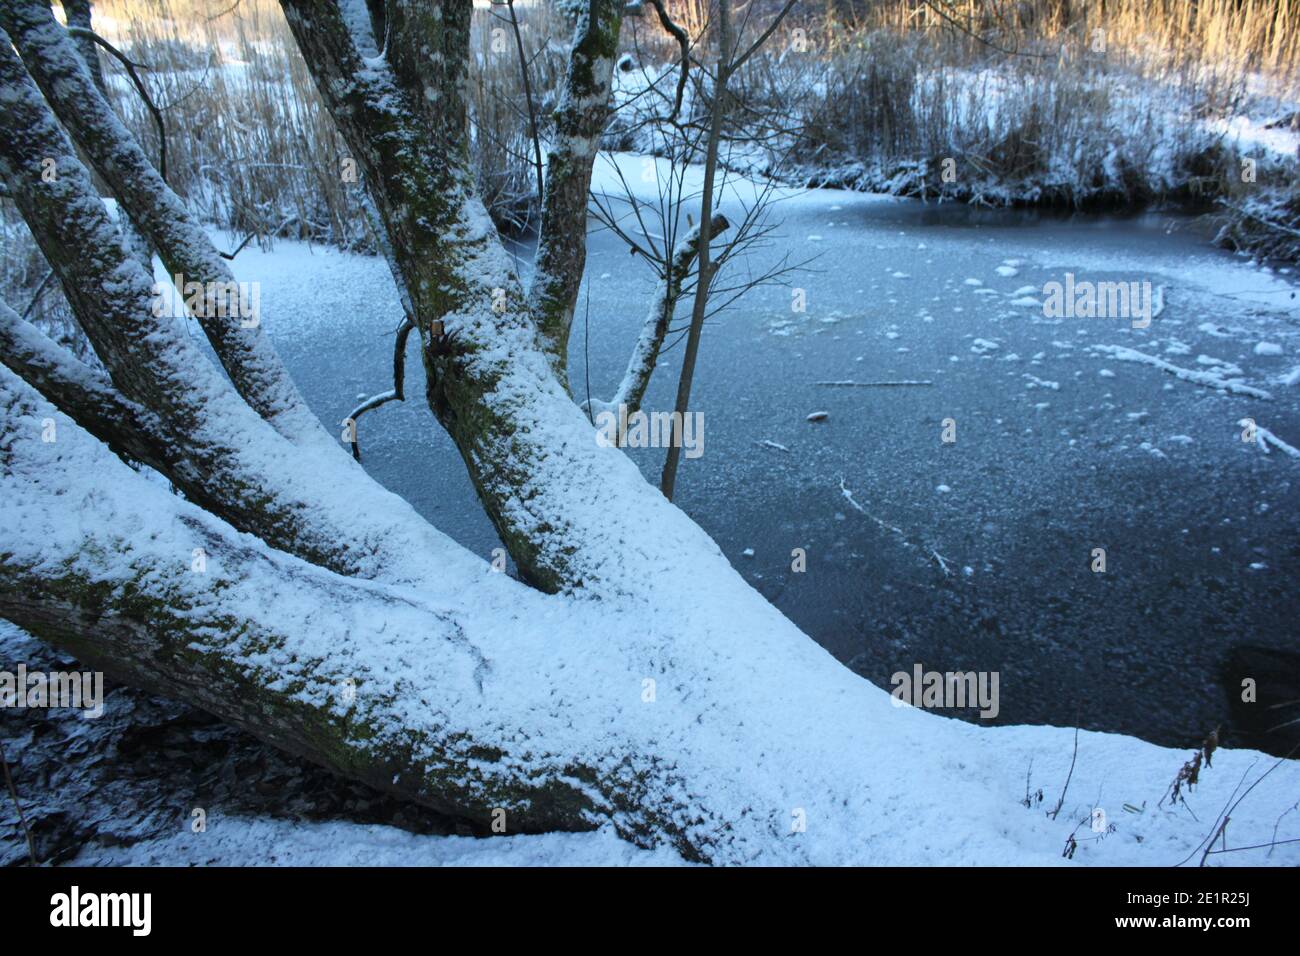 Winter landscapes. Winter walks in public parks, United Kingdom. Snow covered trees and icy lakes, winter parkland. Walking in the woods, winter season. Stock Photo